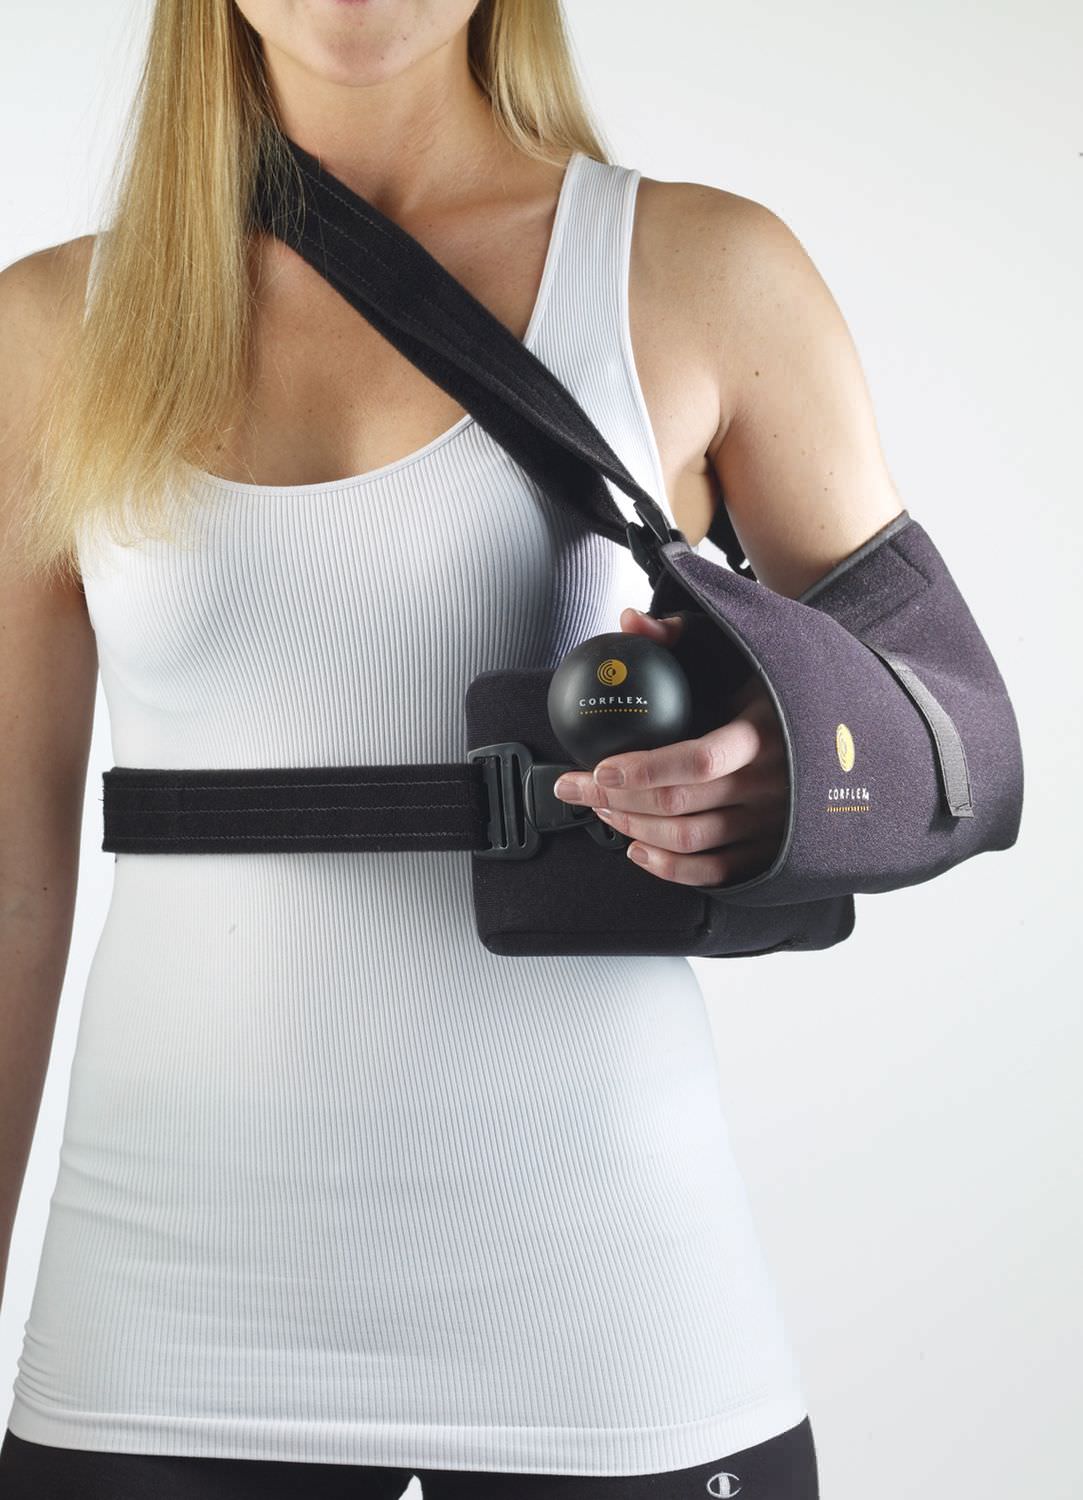 Arm sling with shoulder abduction pillow / human 23-1911 / 23-1912 / 23-1913 / 23-1914 Corflex